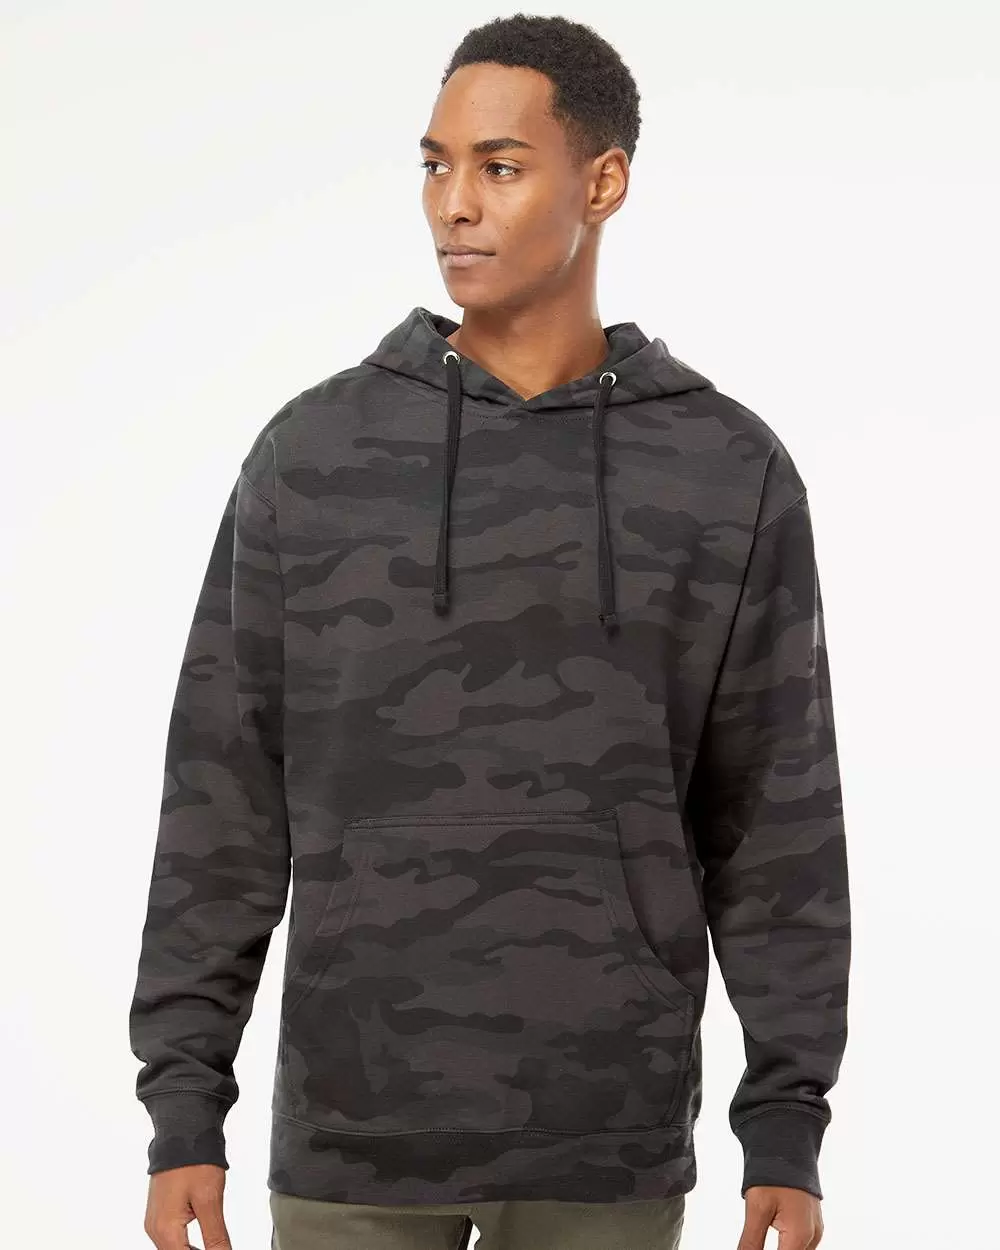 Independent Trading Co. SS4500 Midweight Hoodie Black Camo - From $12.31